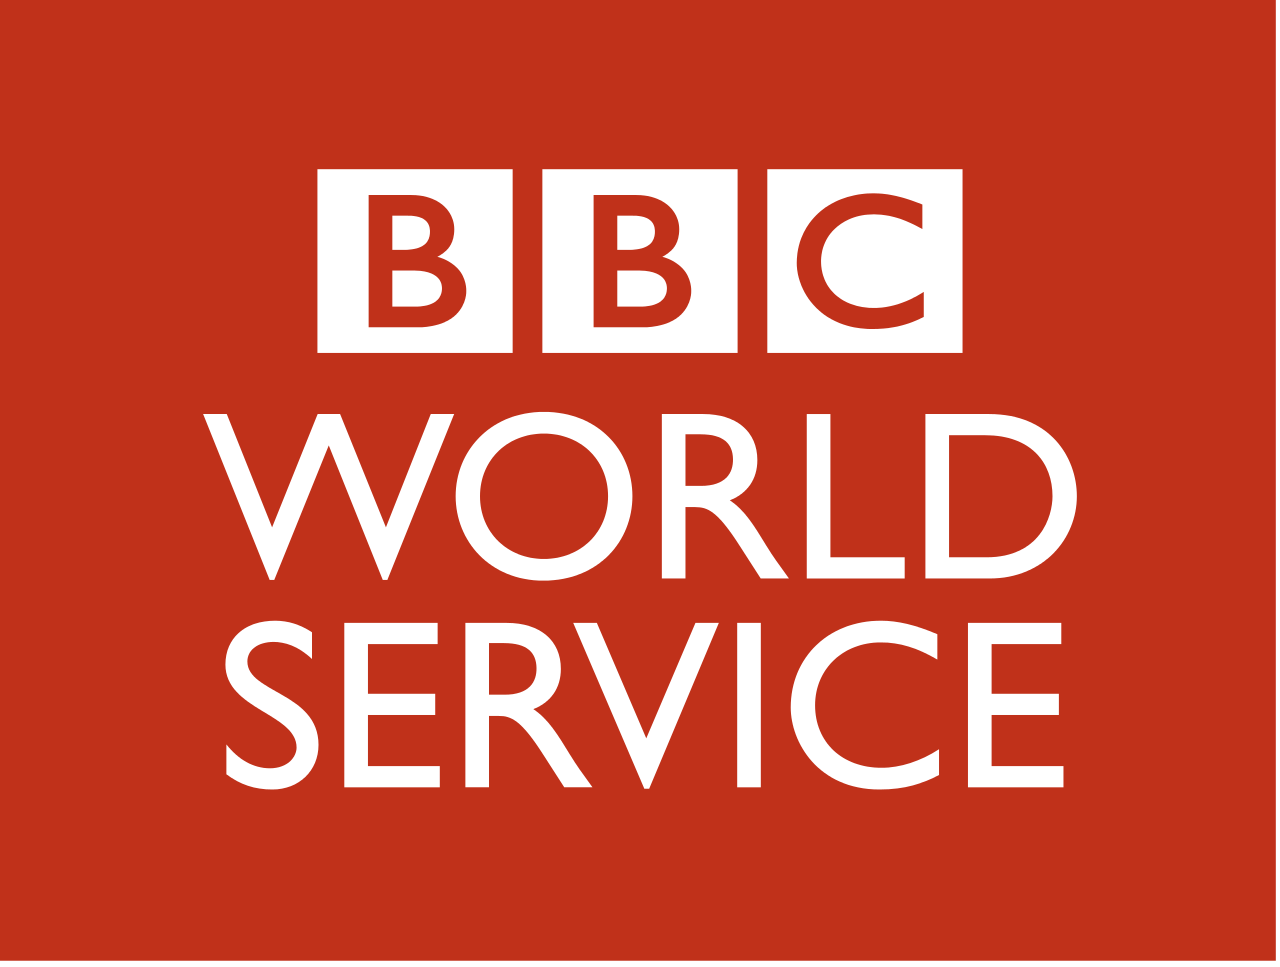 BBC_World_Service_red.svg.png